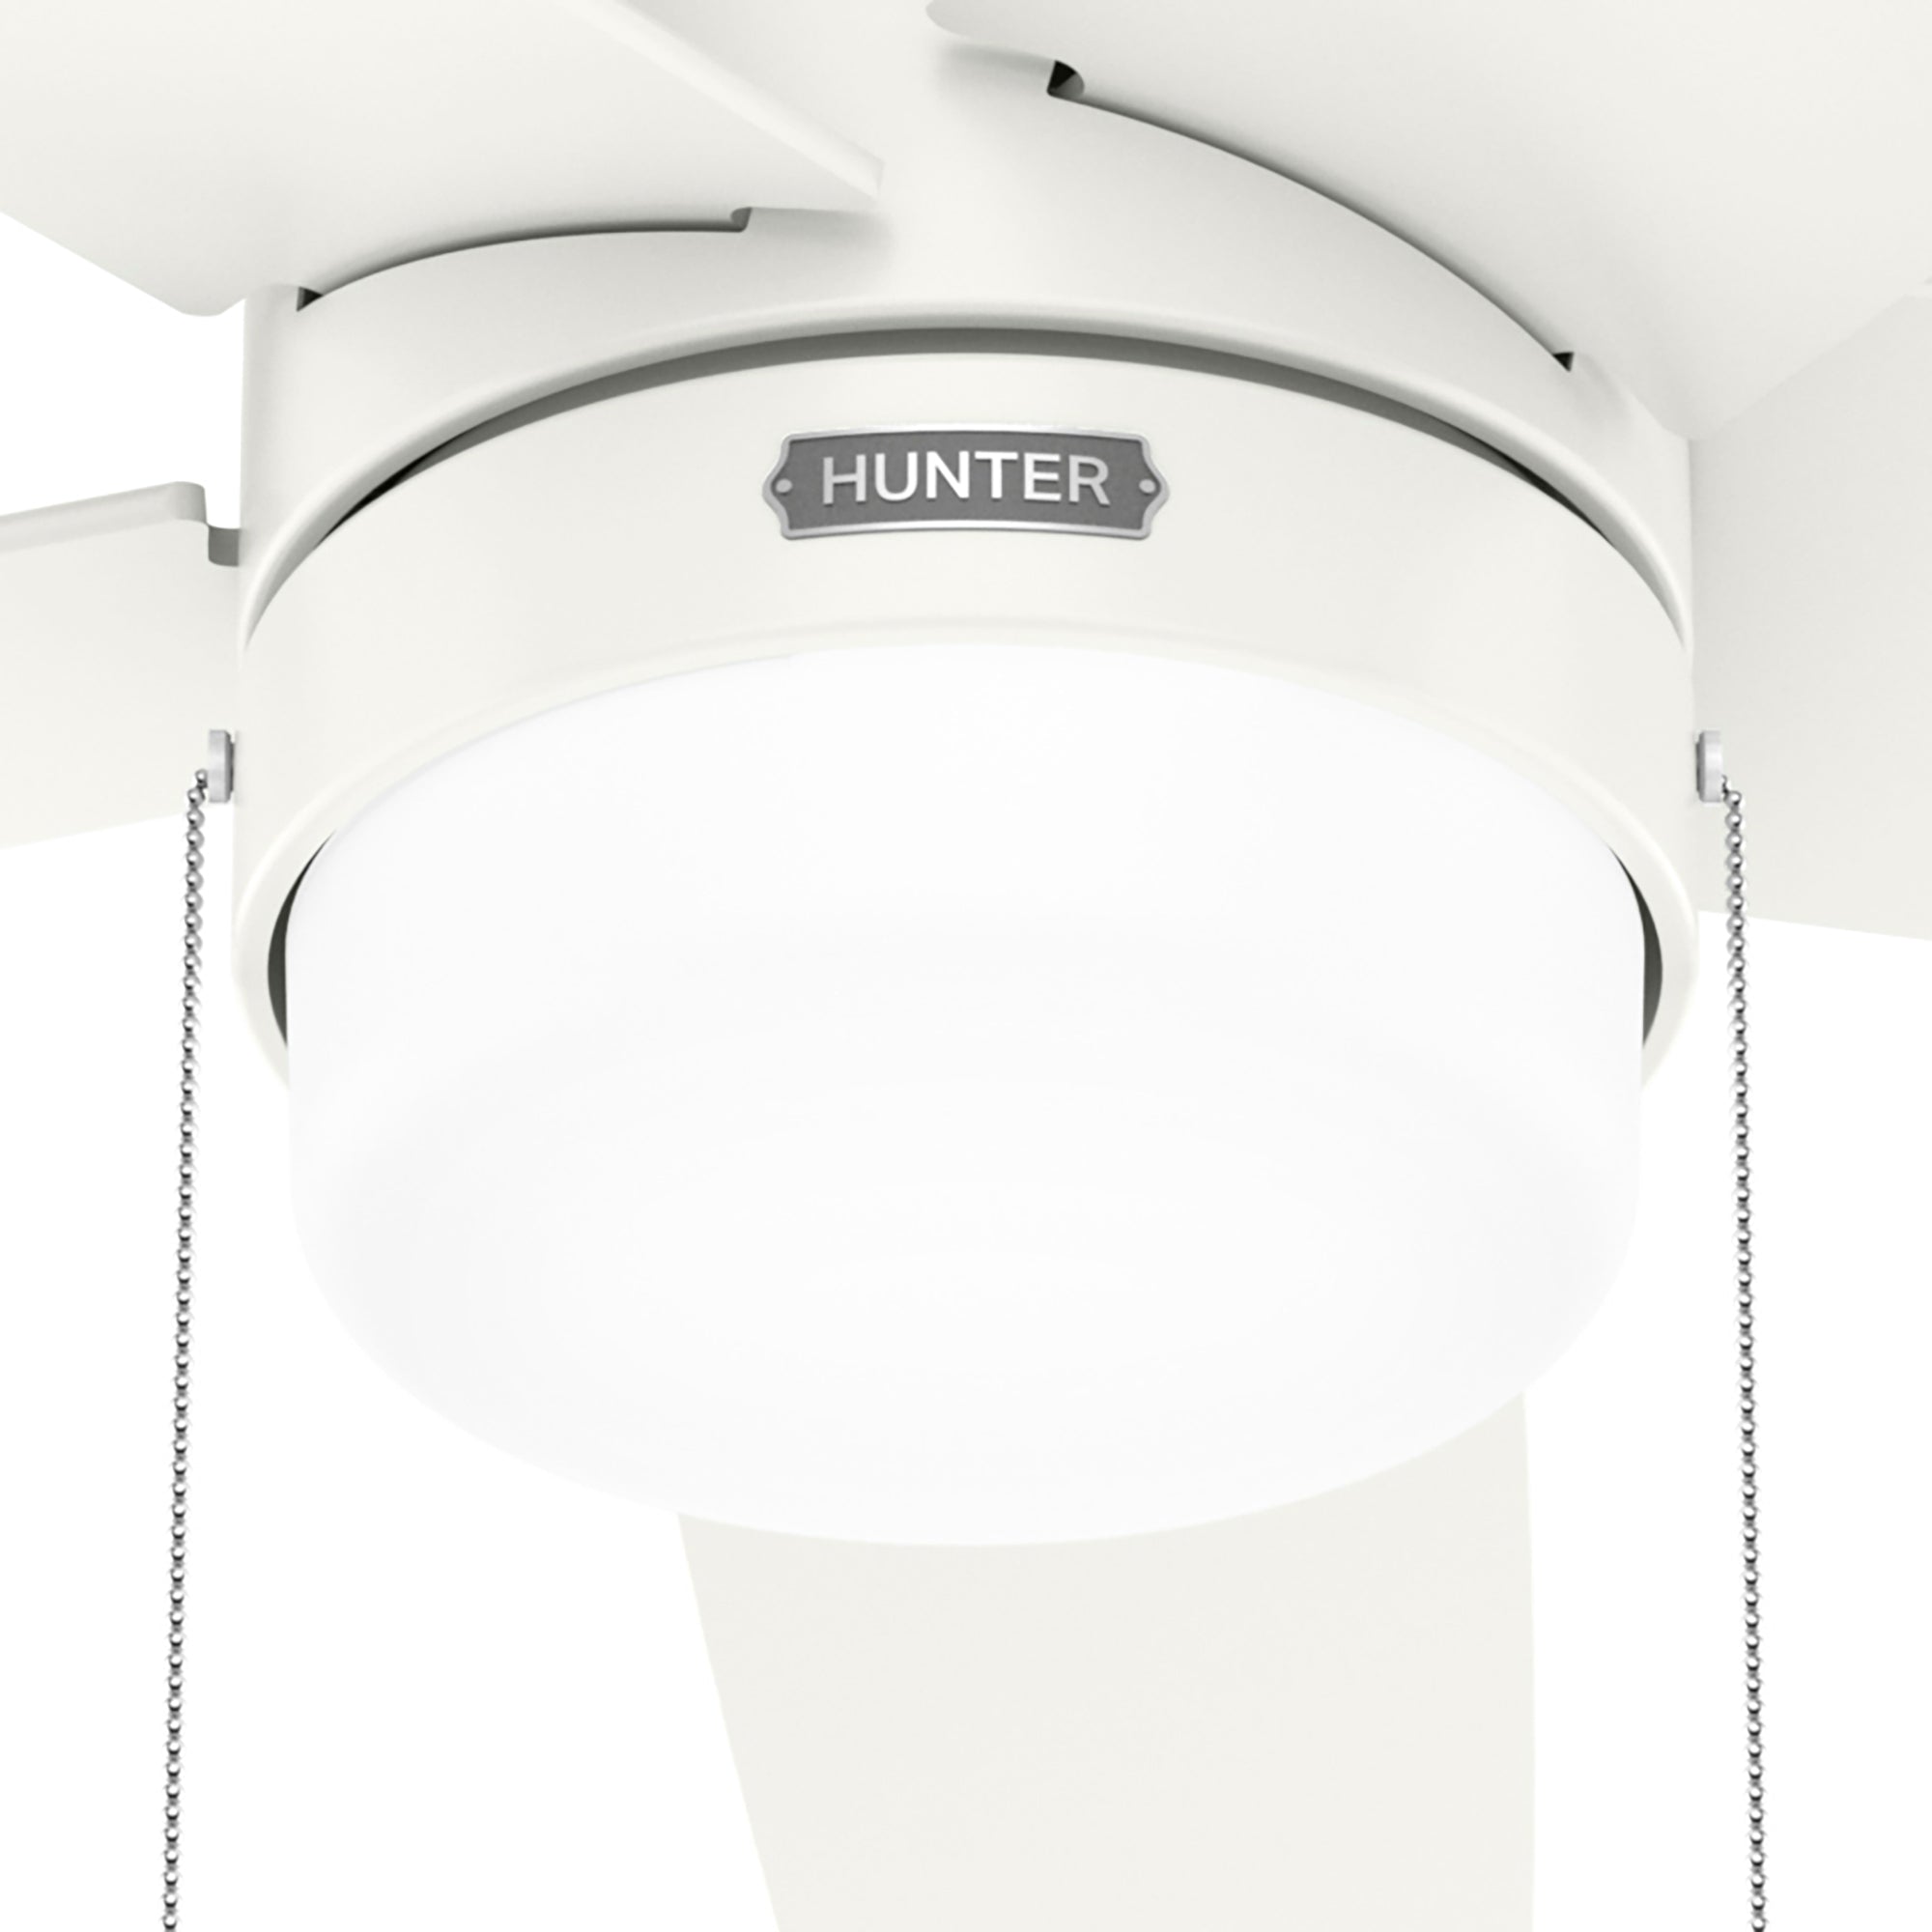 Hunter 52 inch Bardot Ceiling Fan with LED Light Kit and Pull Chain Ceiling Fan Hunter   